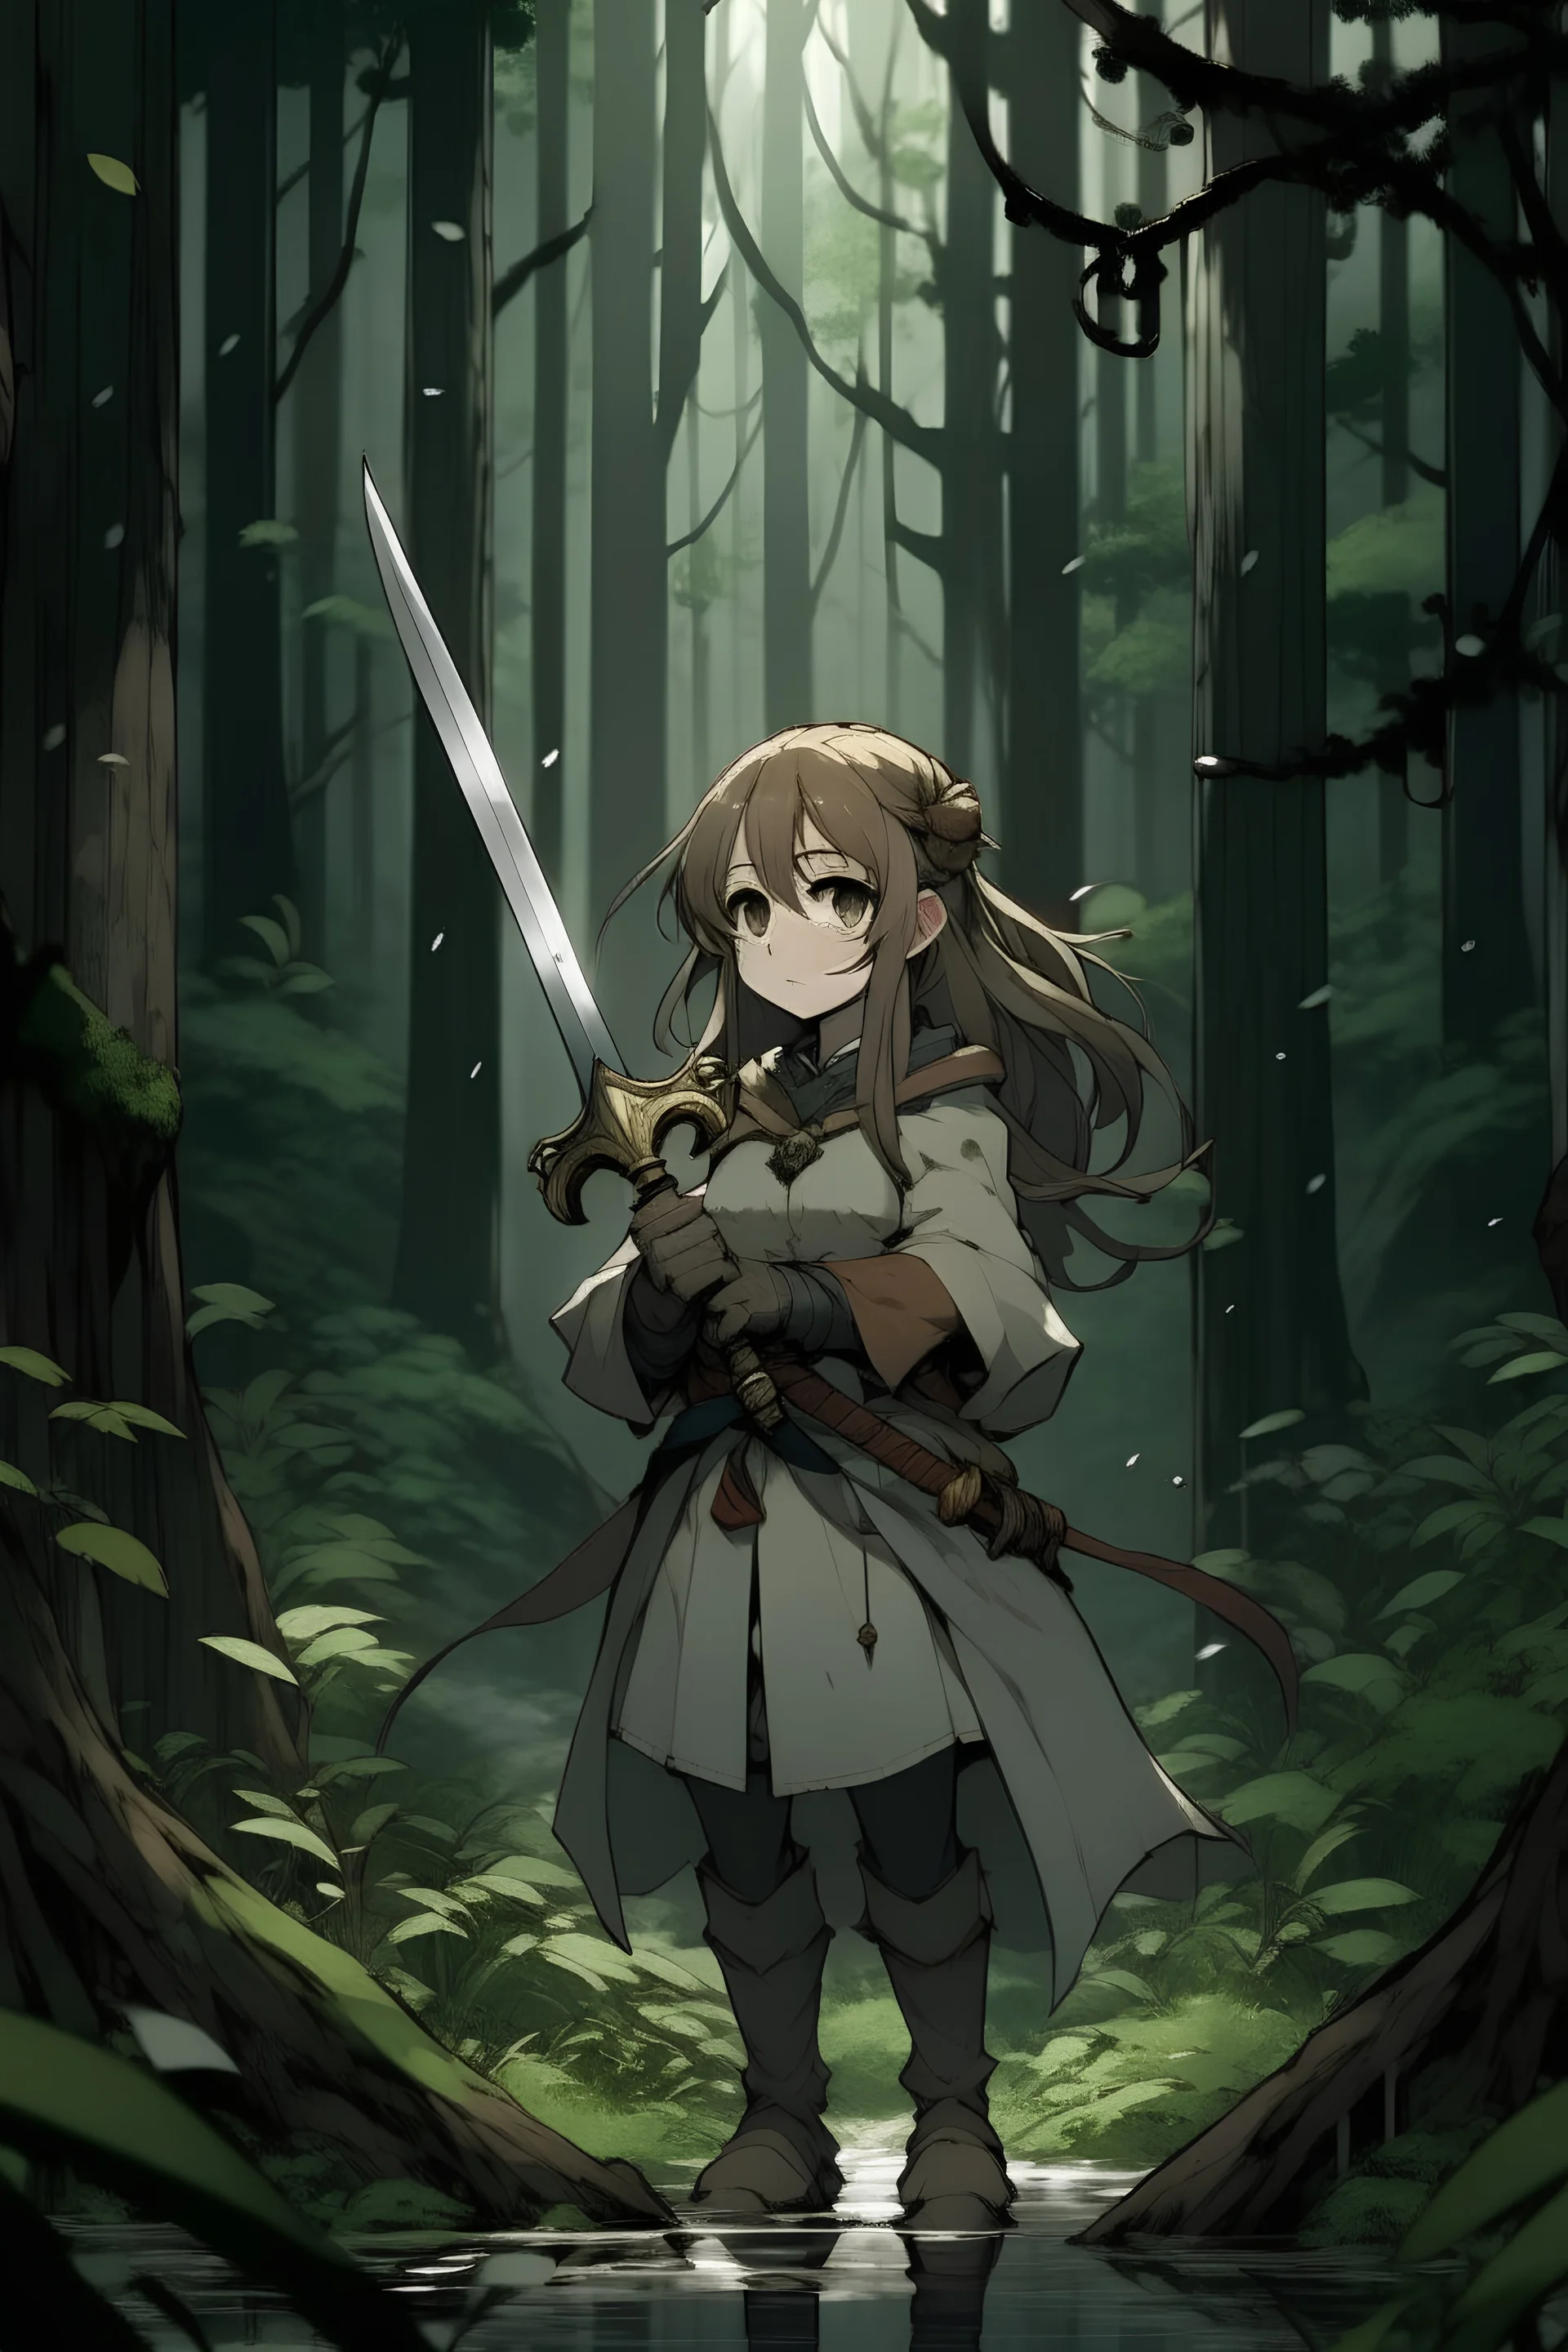 Eris Greyrat from mushoku tensei, holding a sword in a rainy forest